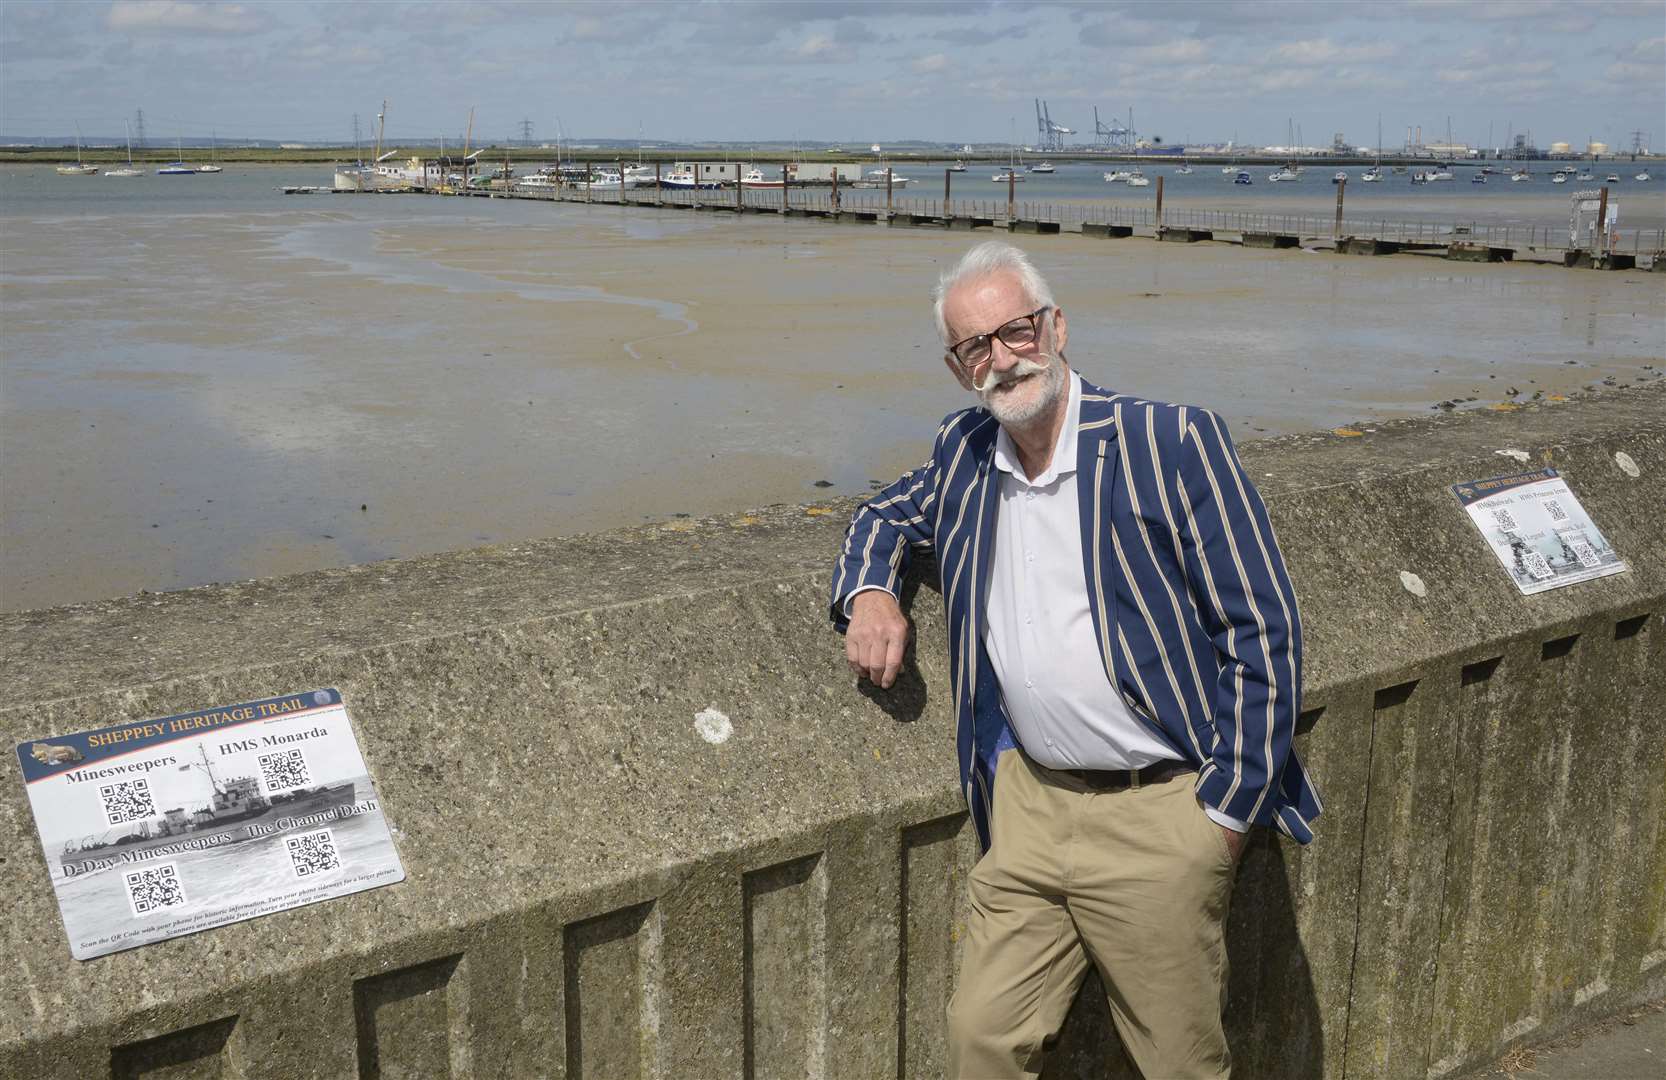 The heritage trail organiser, John Jones, by the signs at Queenborough's sea wall. Picture: Paul Amos